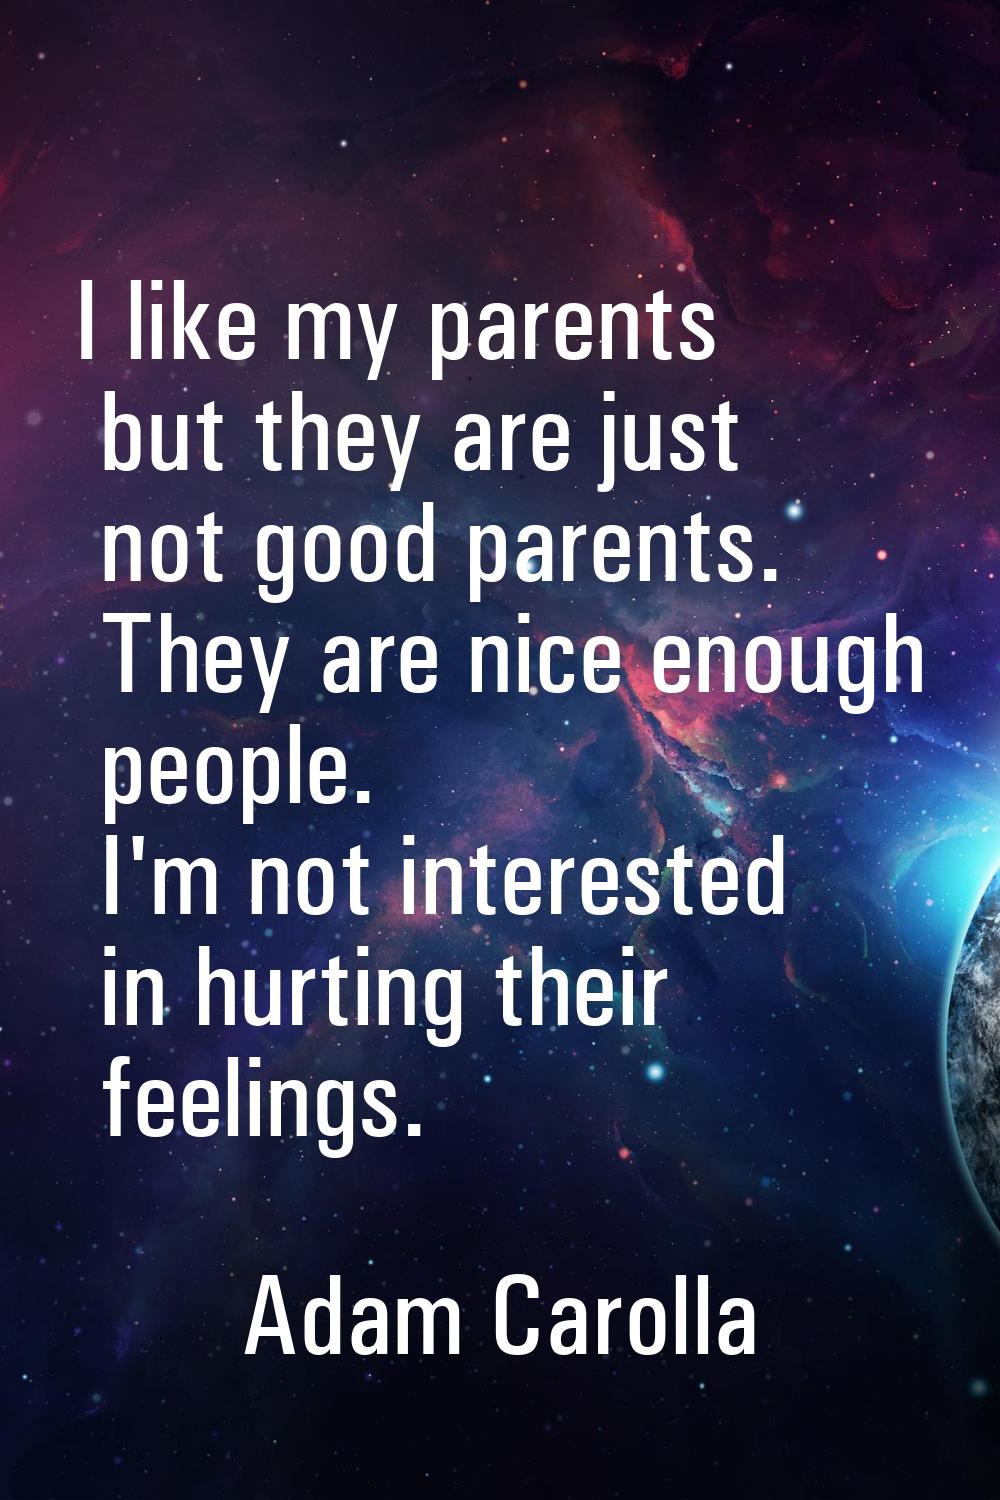 I like my parents but they are just not good parents. They are nice enough people. I'm not interest